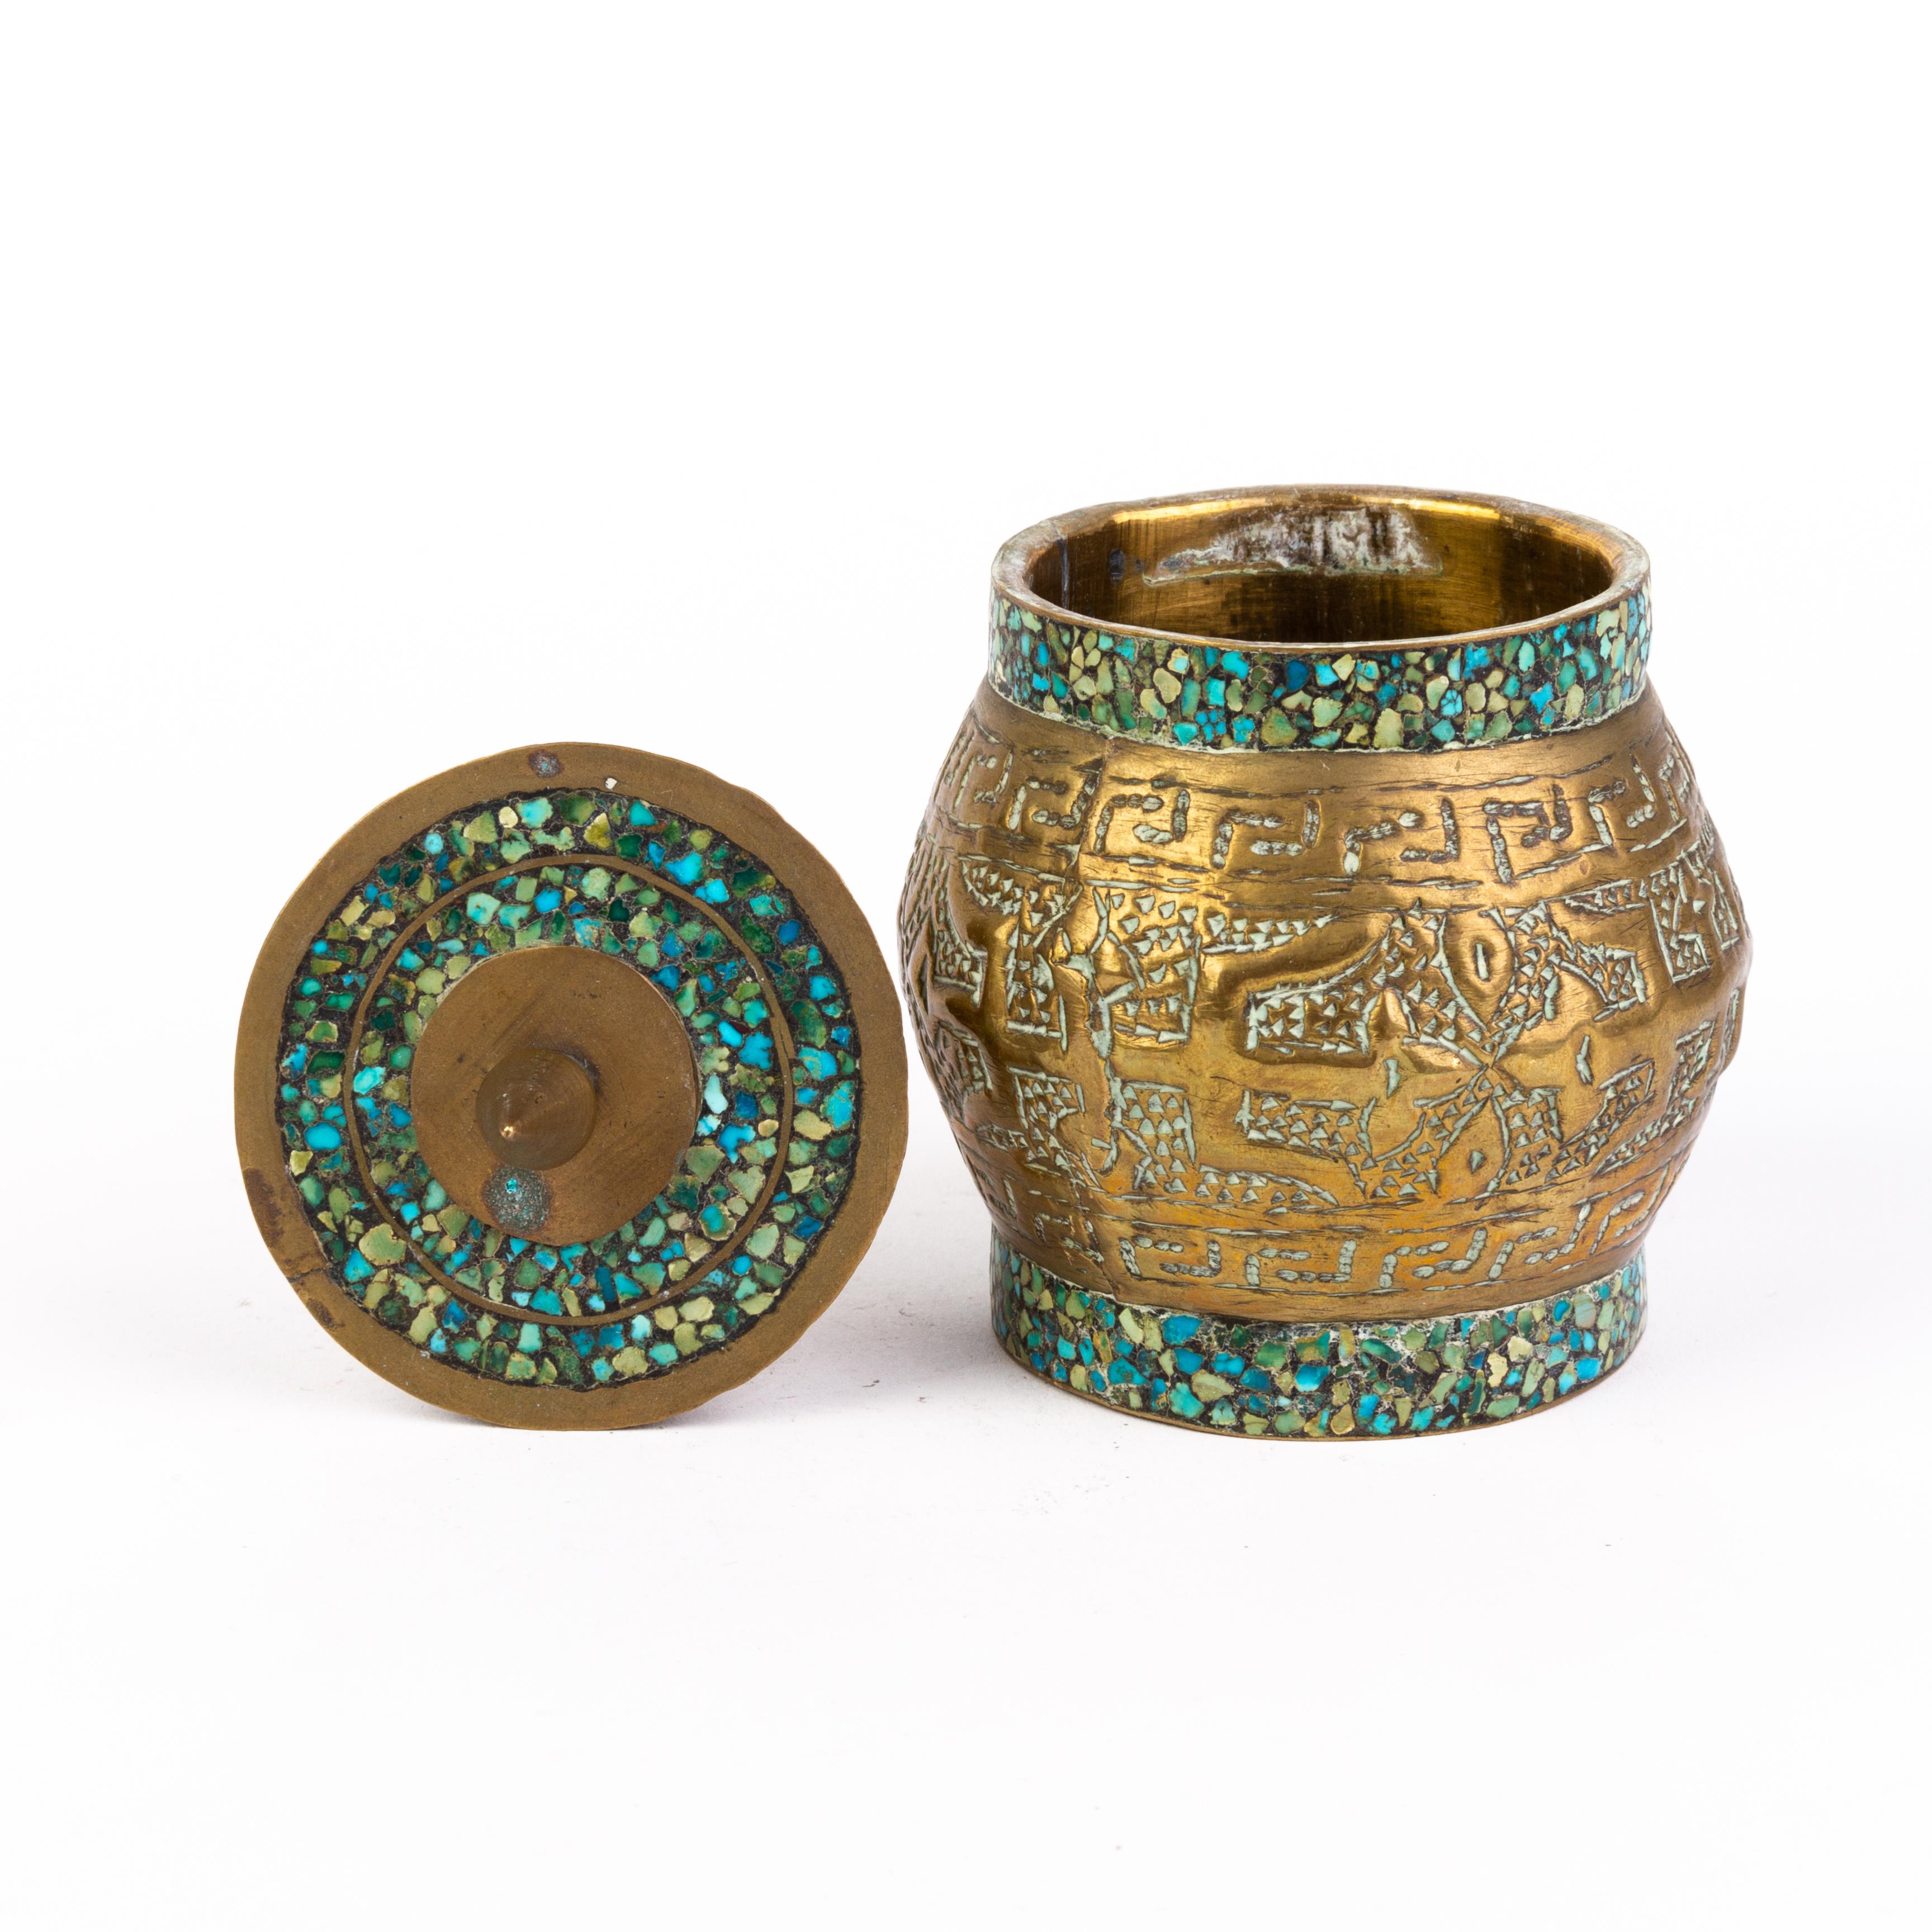 Chinese Tibetan Inlaid Turquoise Mosaic Brass Lidded Jar 19th Century  For Sale 2